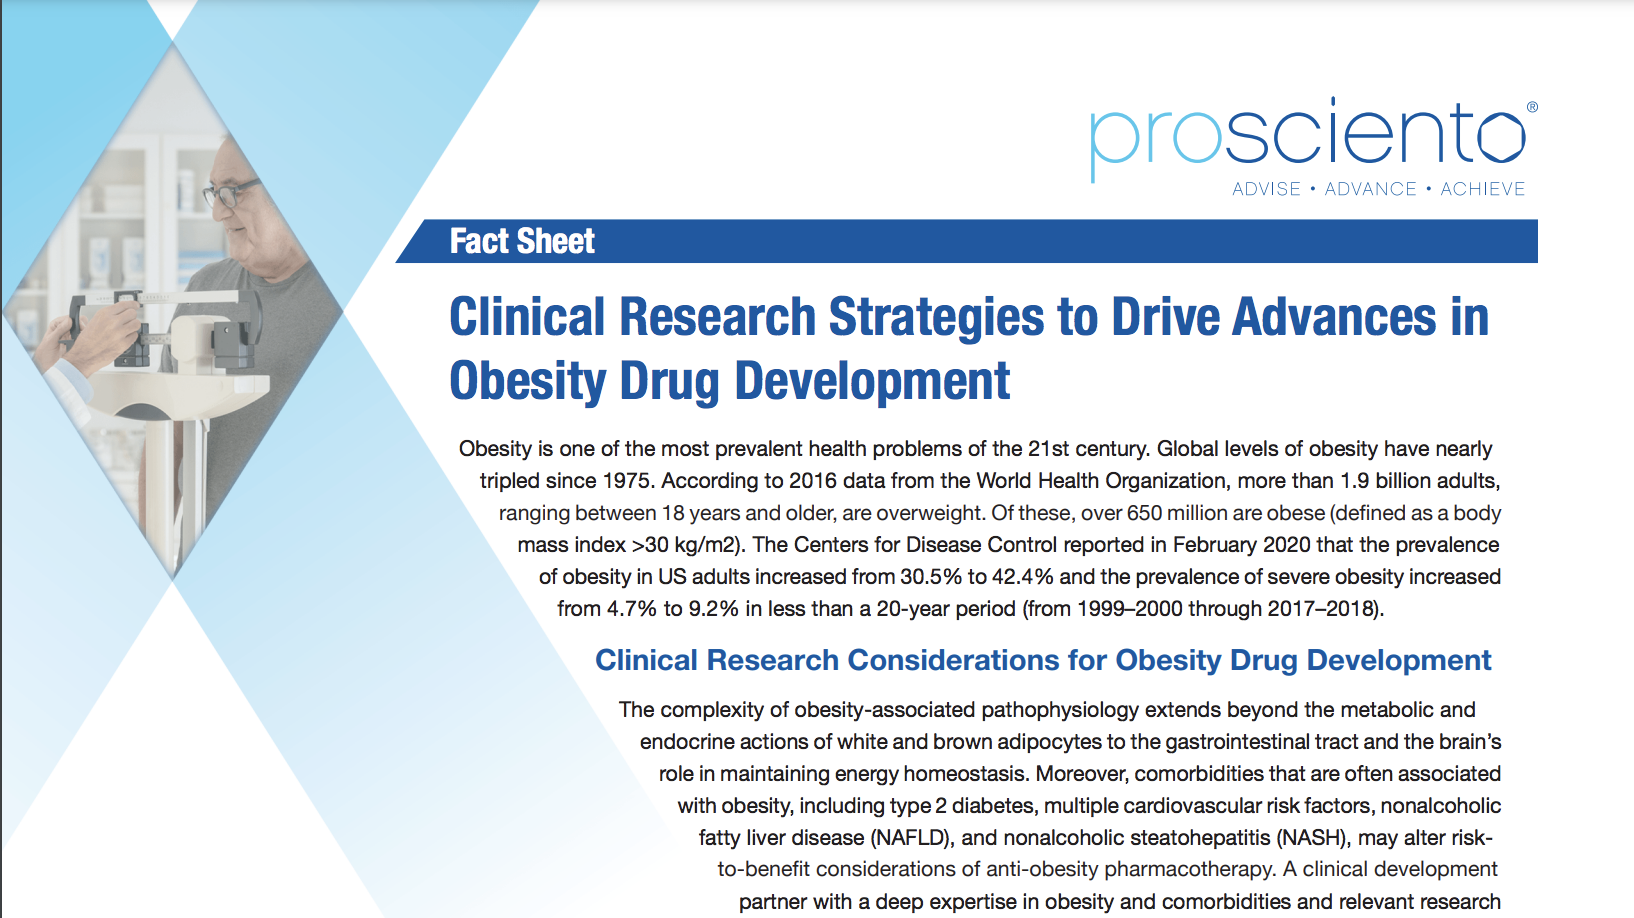 image of Clinical Research Strategies to Drive Advances in Obesity Drug Development